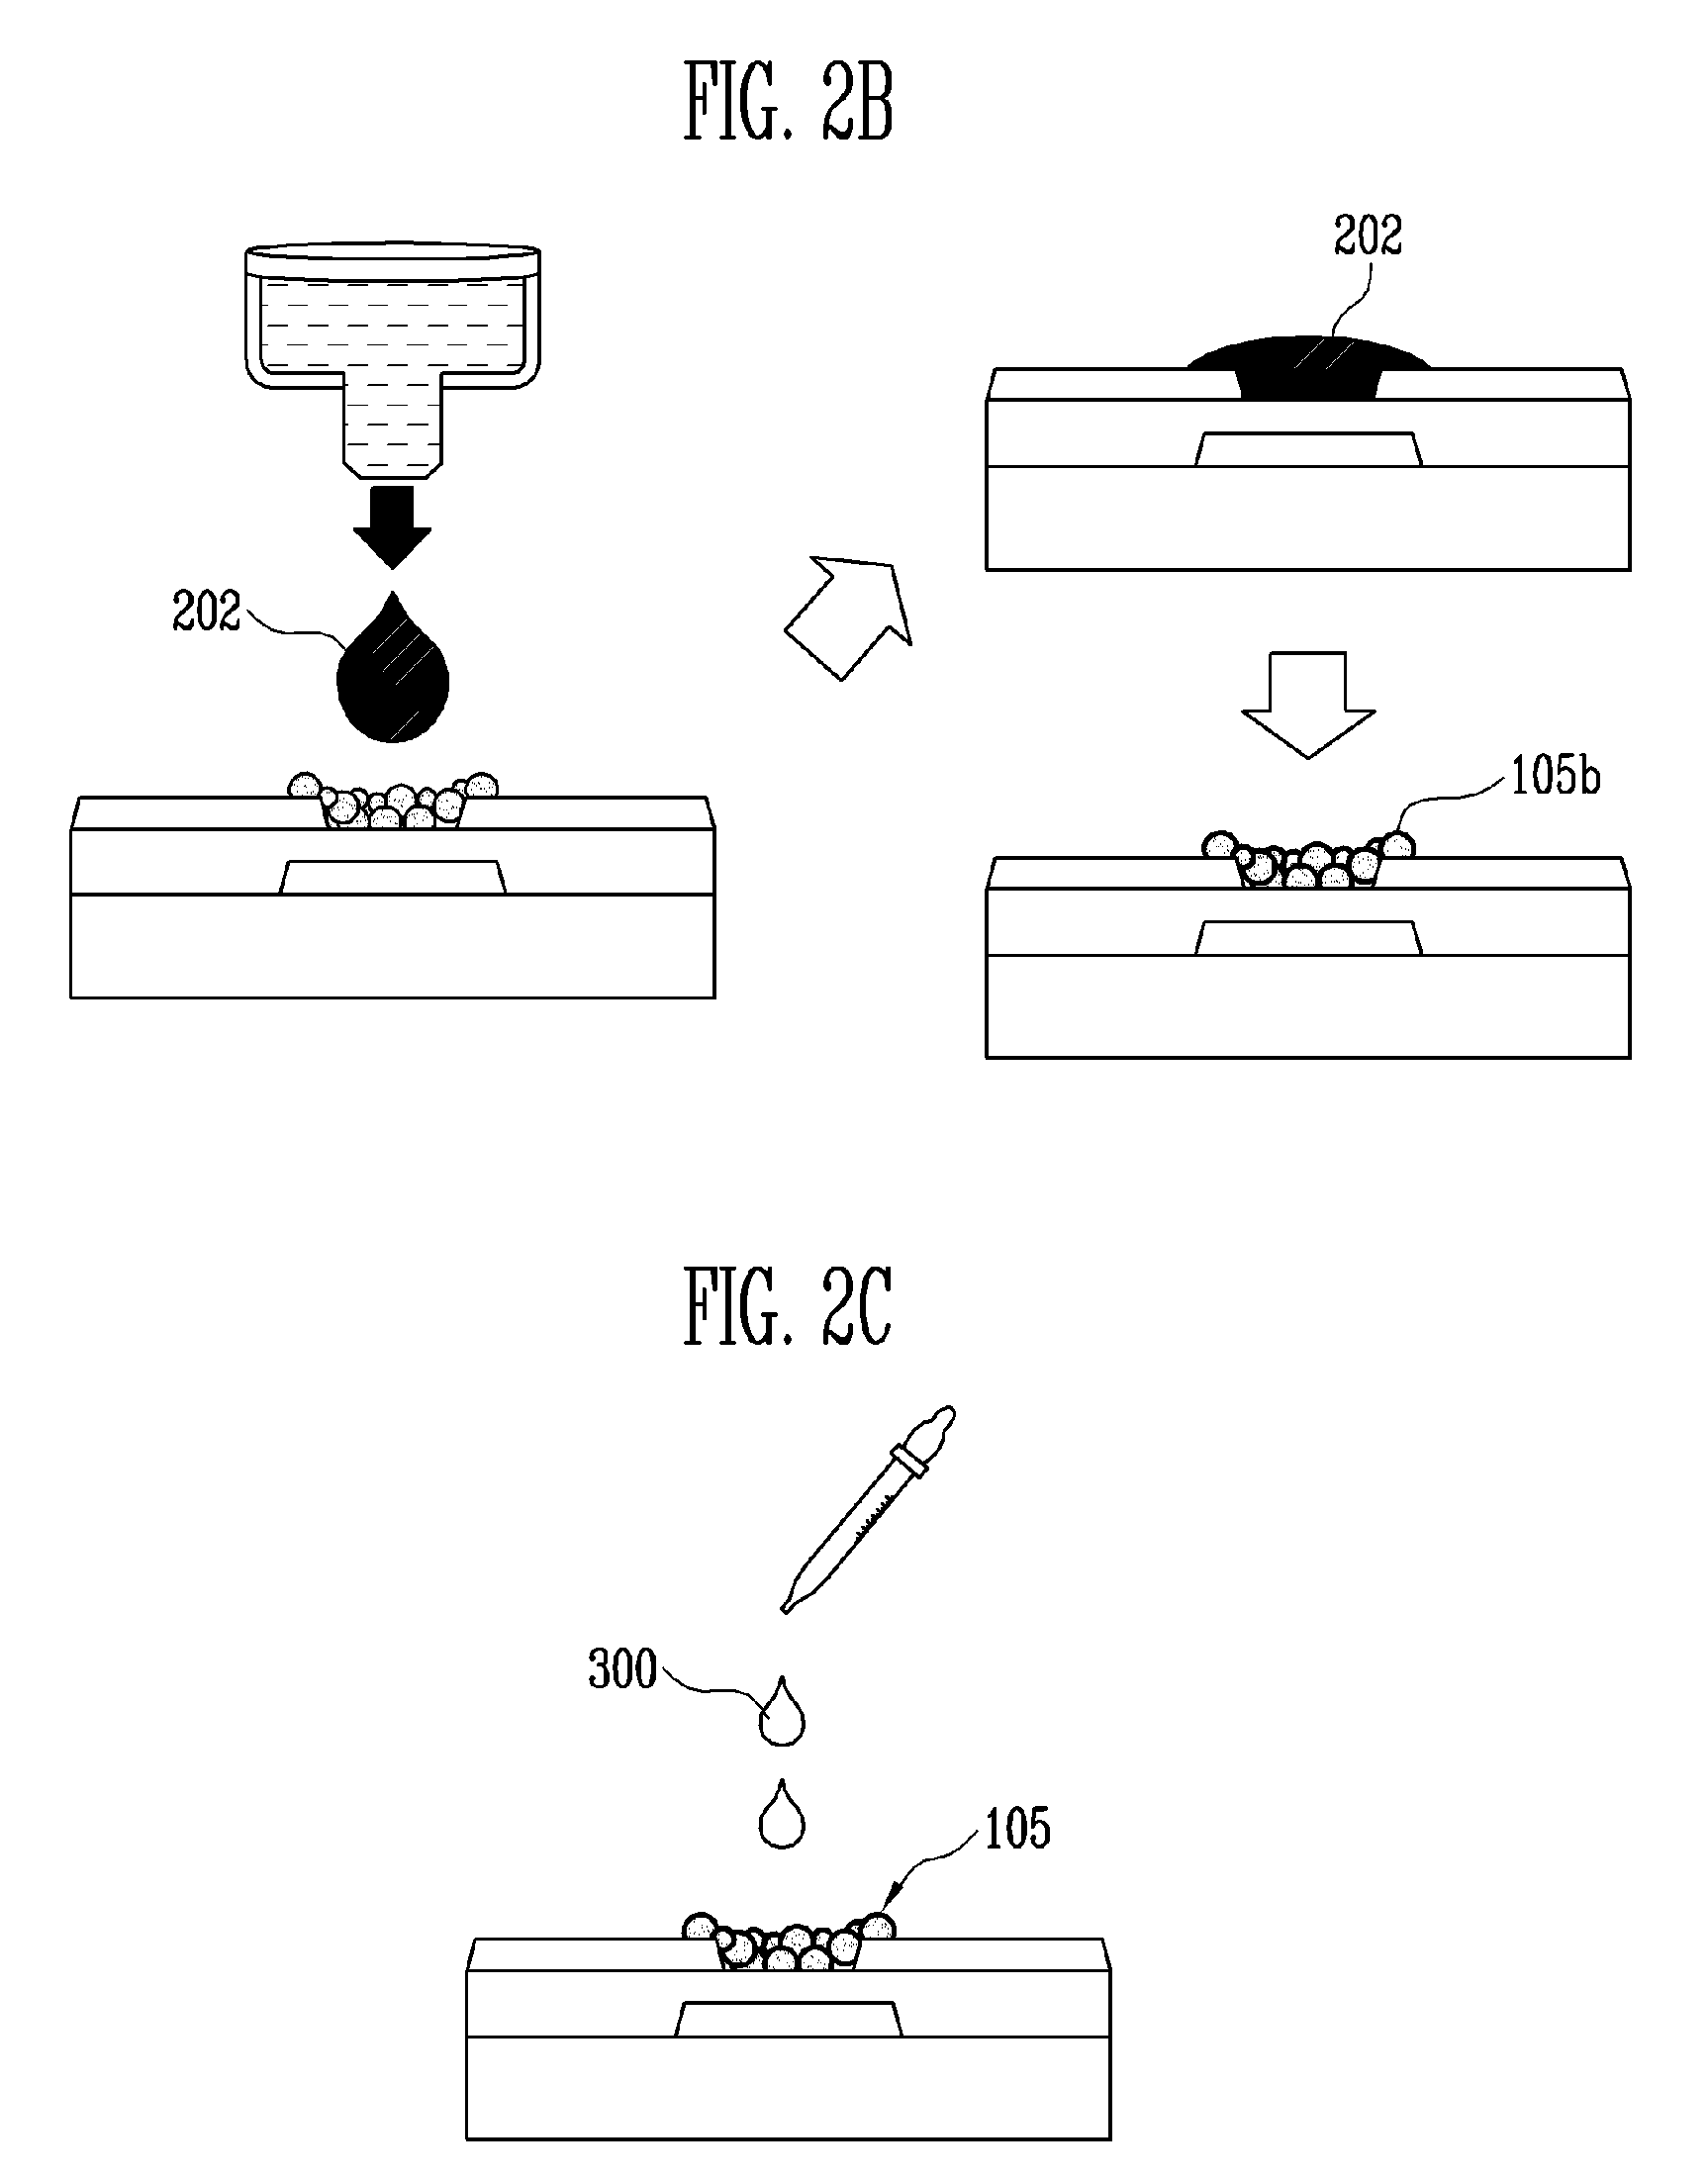 Biosensor having transistor structure and method of fabricating the same